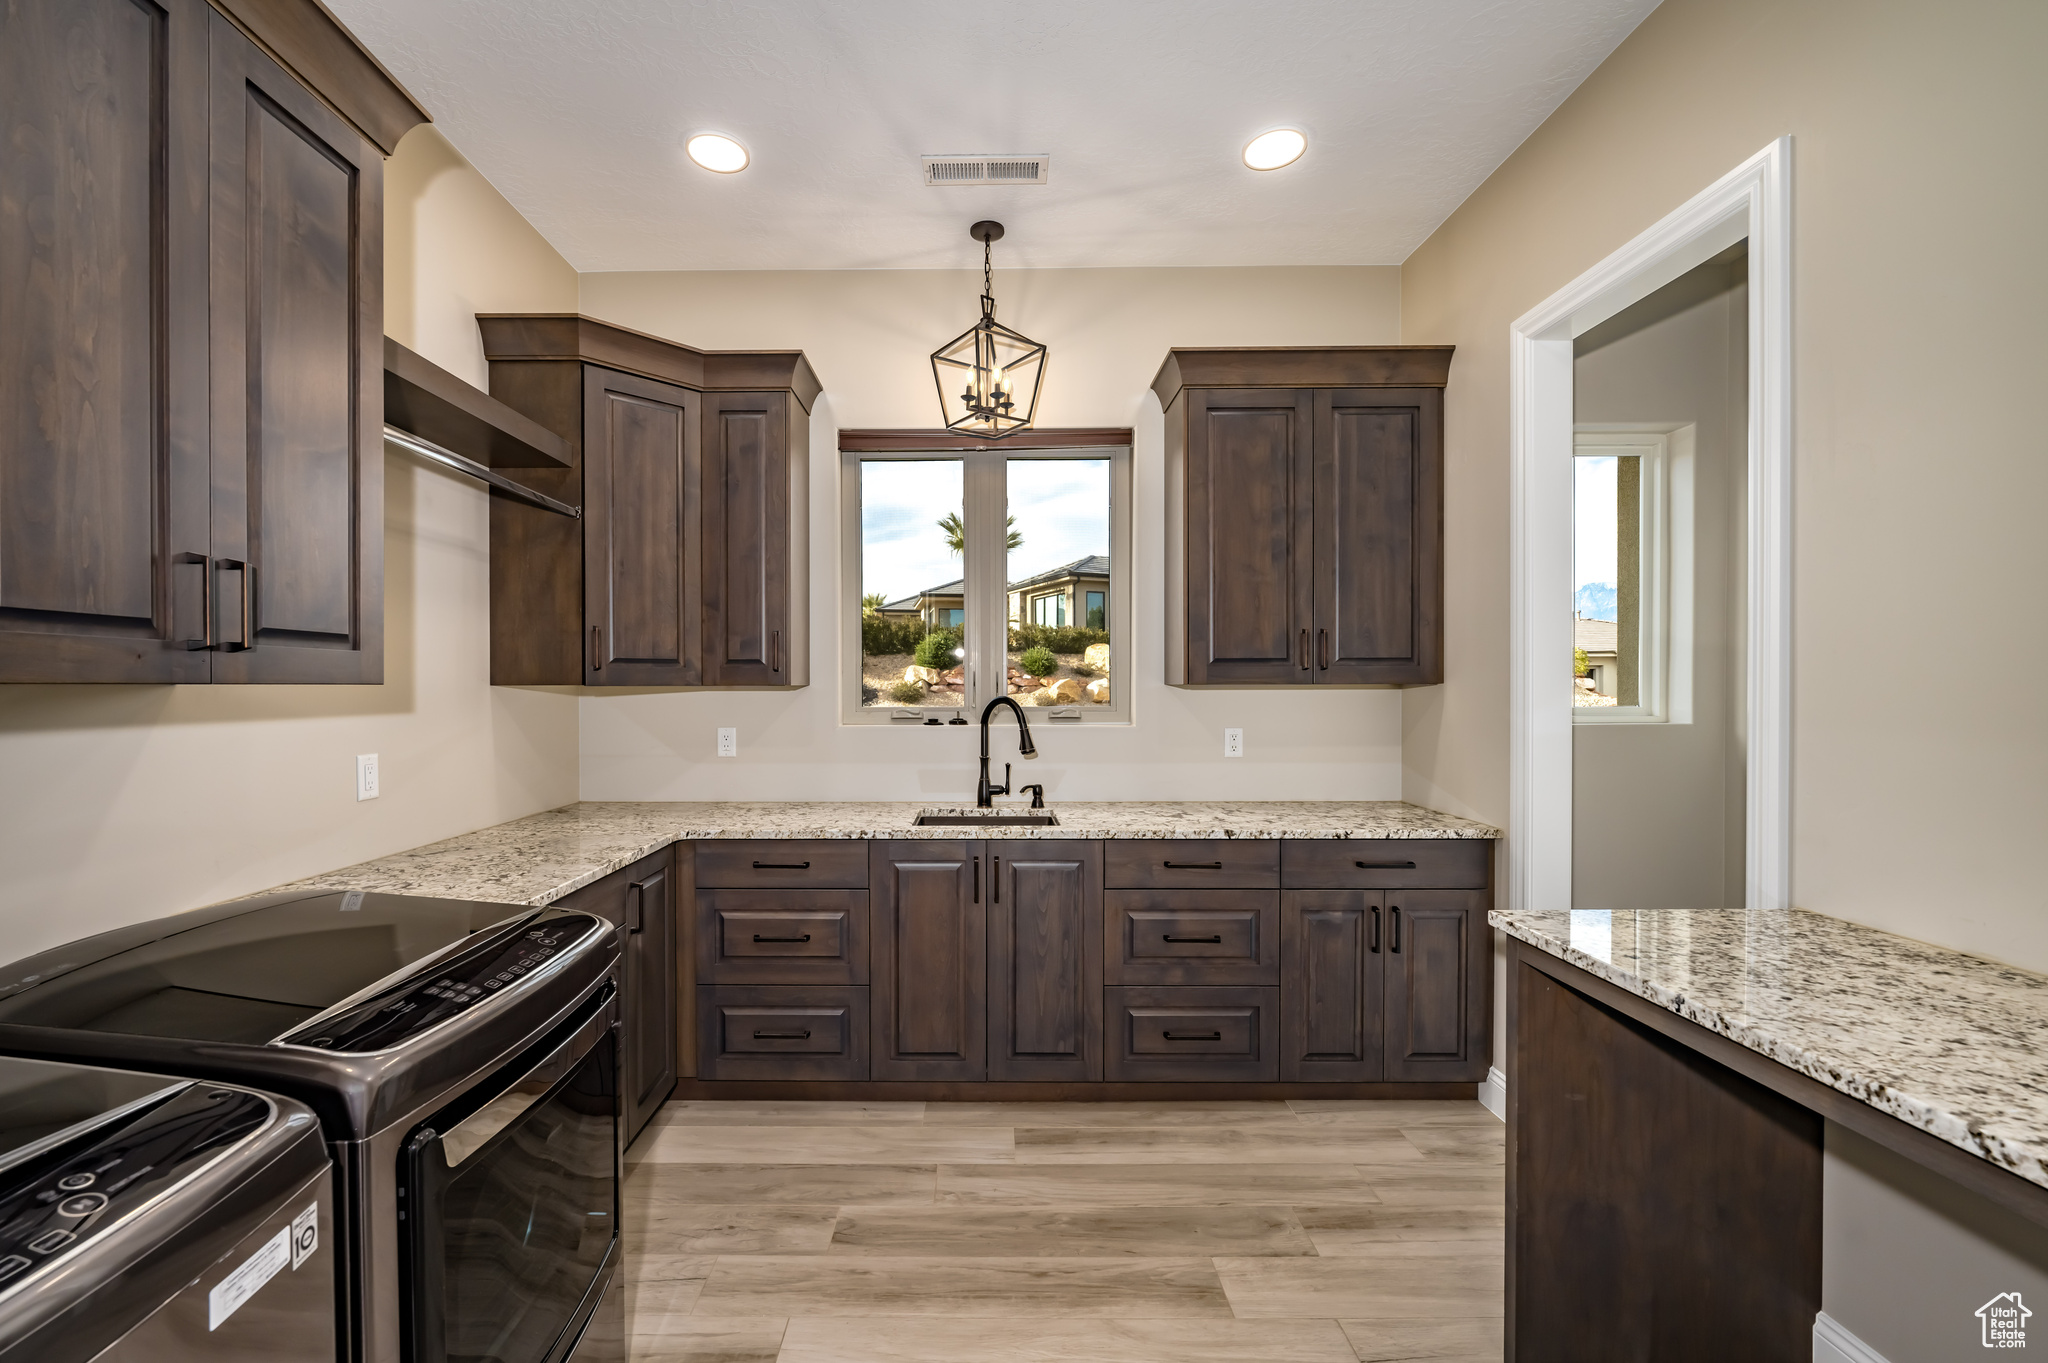 Kitchen featuring light hardwood / wood-style floors, dark brown cabinets, sink, and light stone countertops